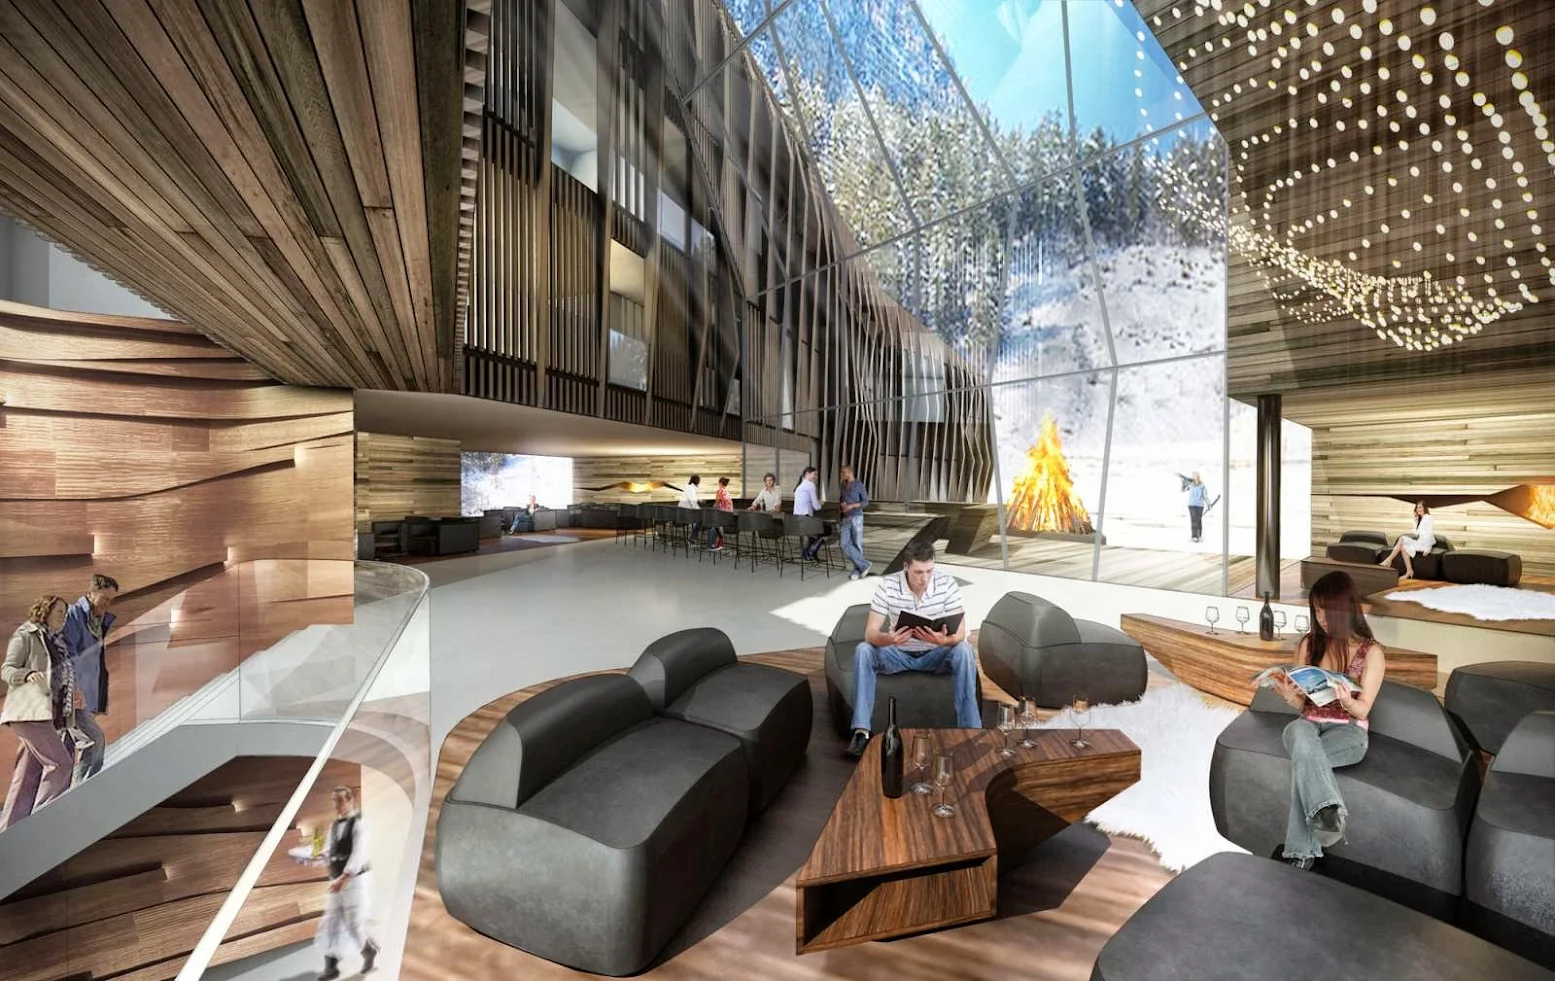 Graft Wins Mountain Resort Competition